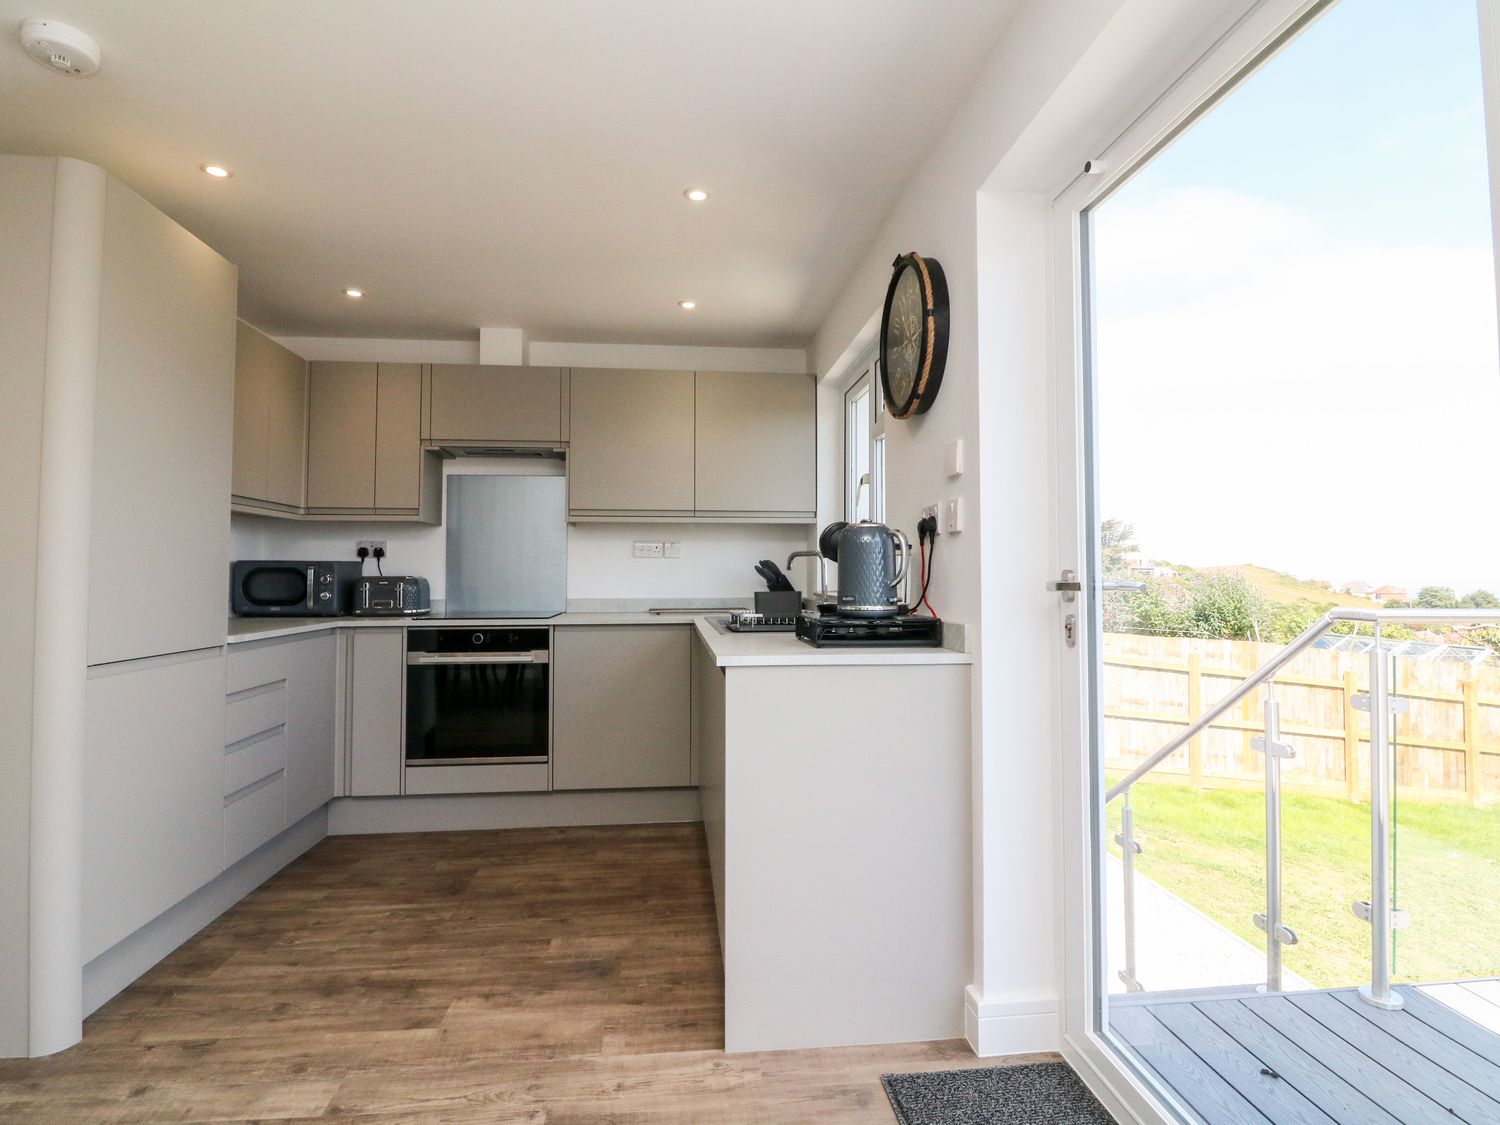 65 Channel View, Ilfracombe